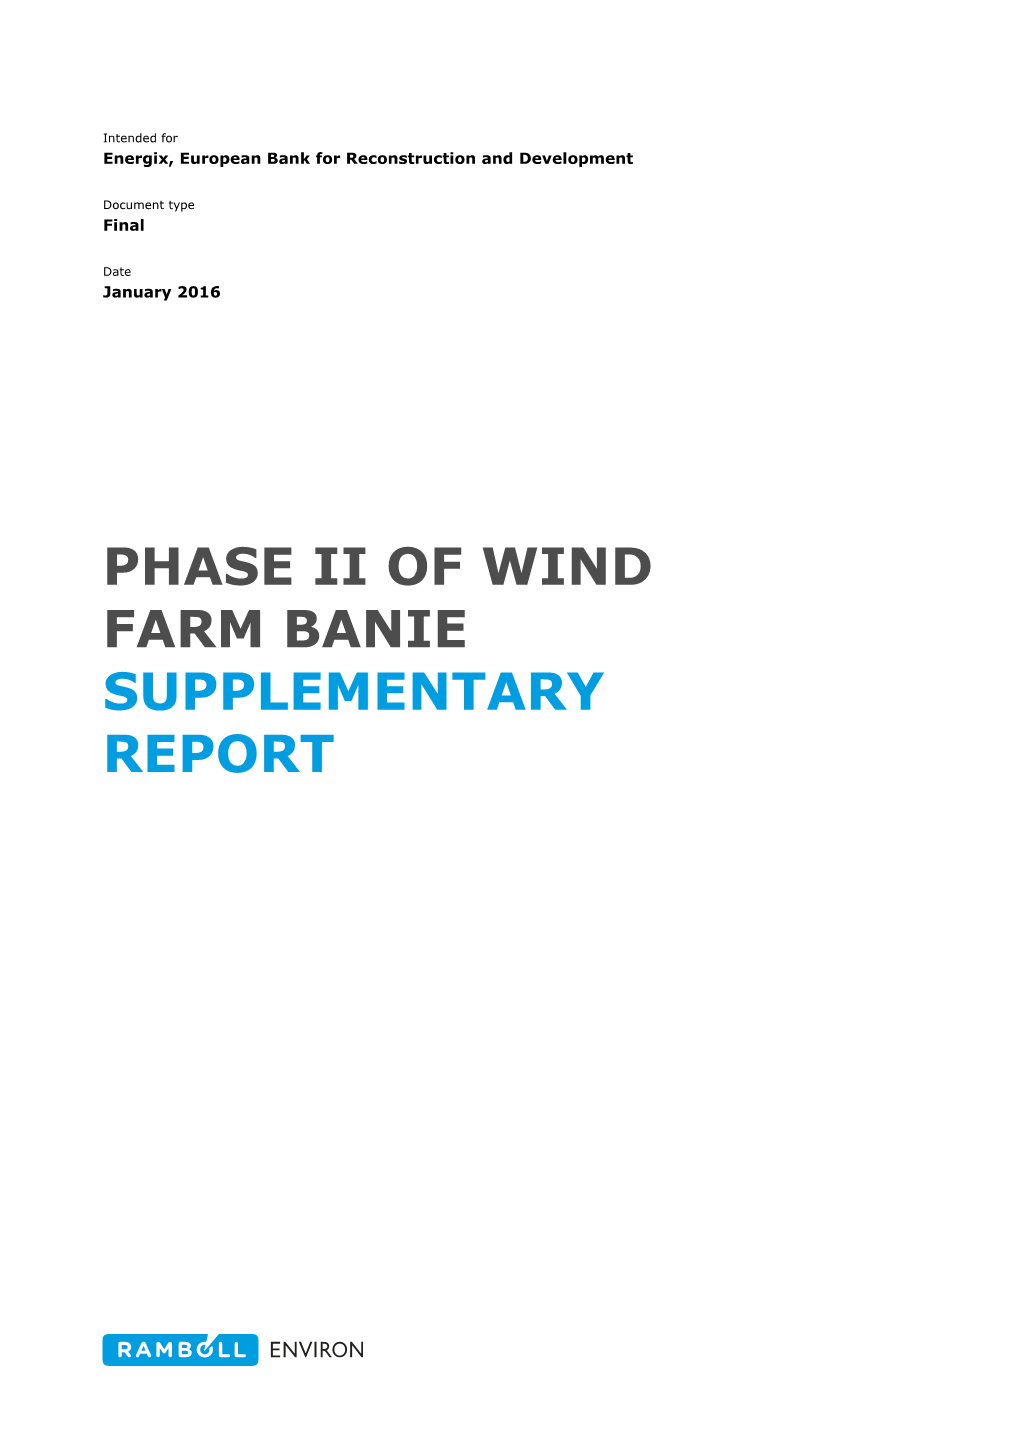 Phase Ii of Wind Farm Banie Supplementary Report